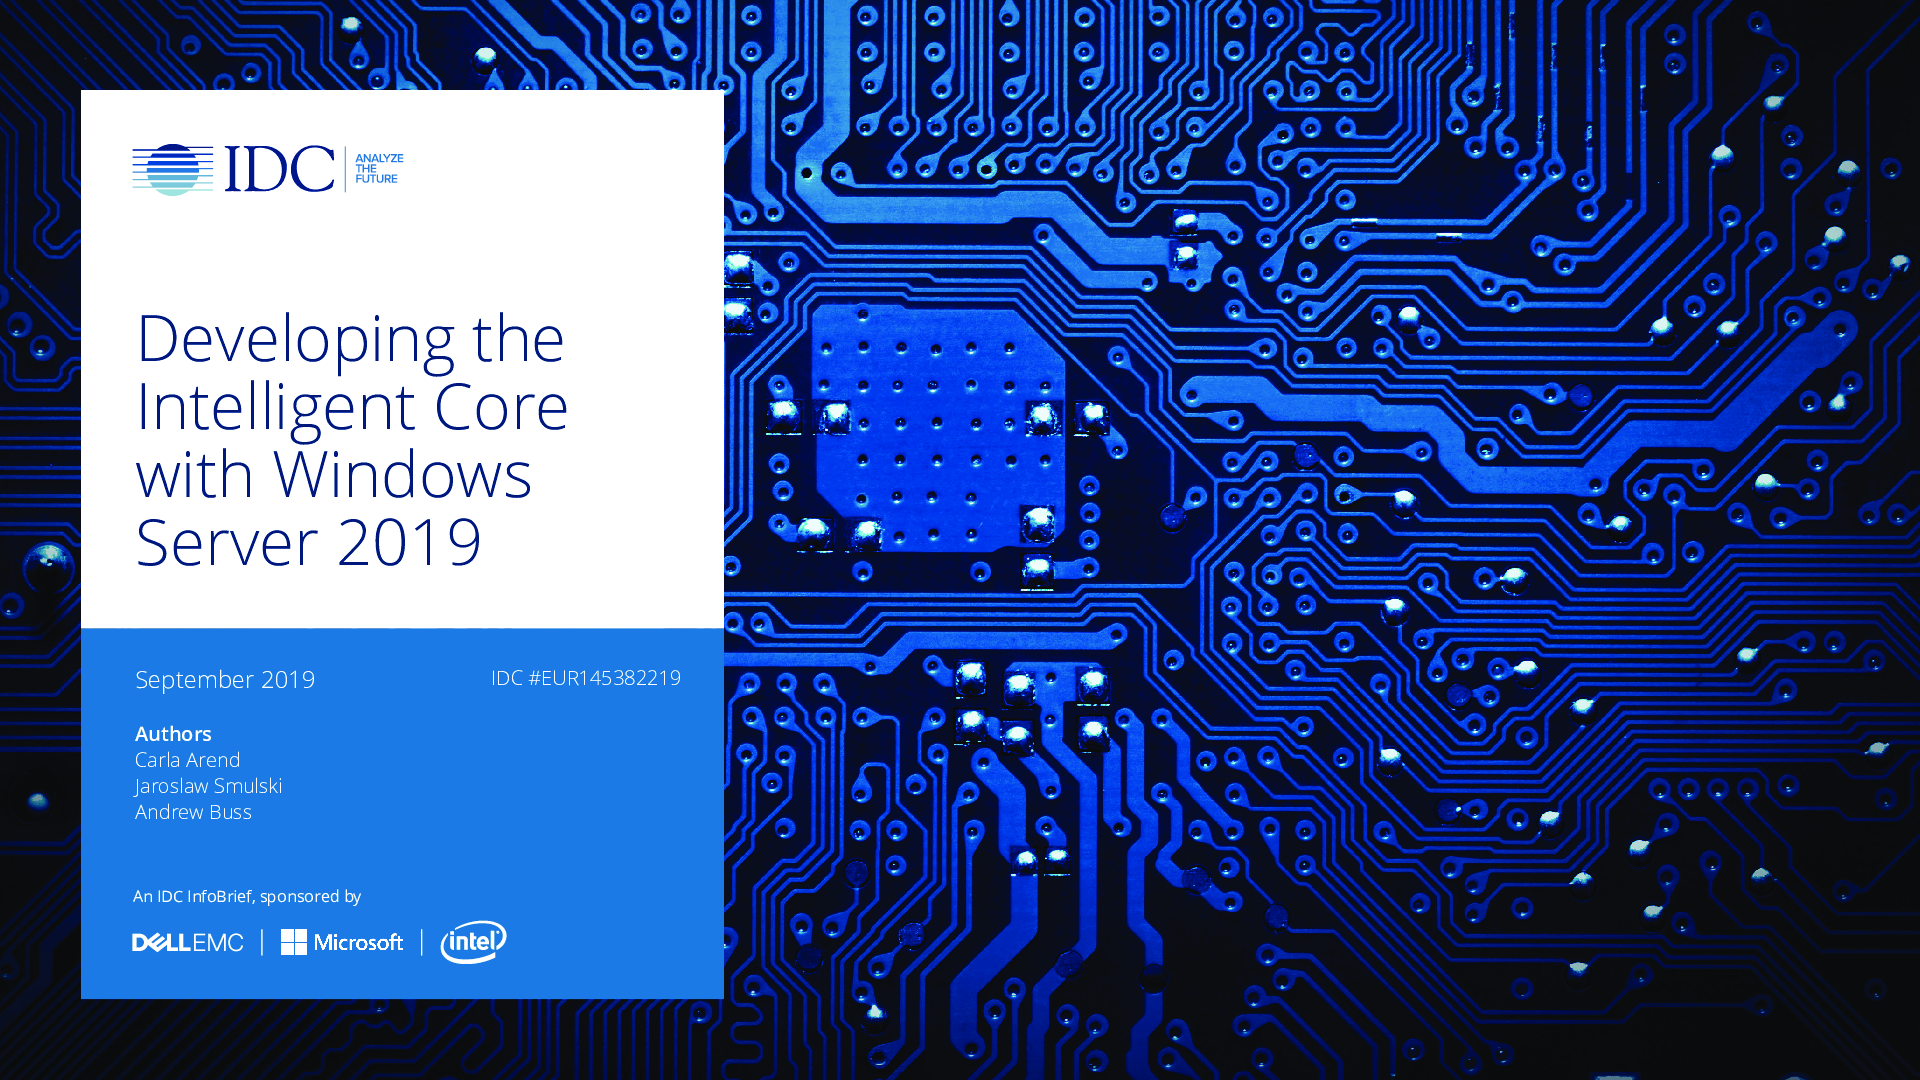 Developing the Intelligent Core with Windows Server 2019